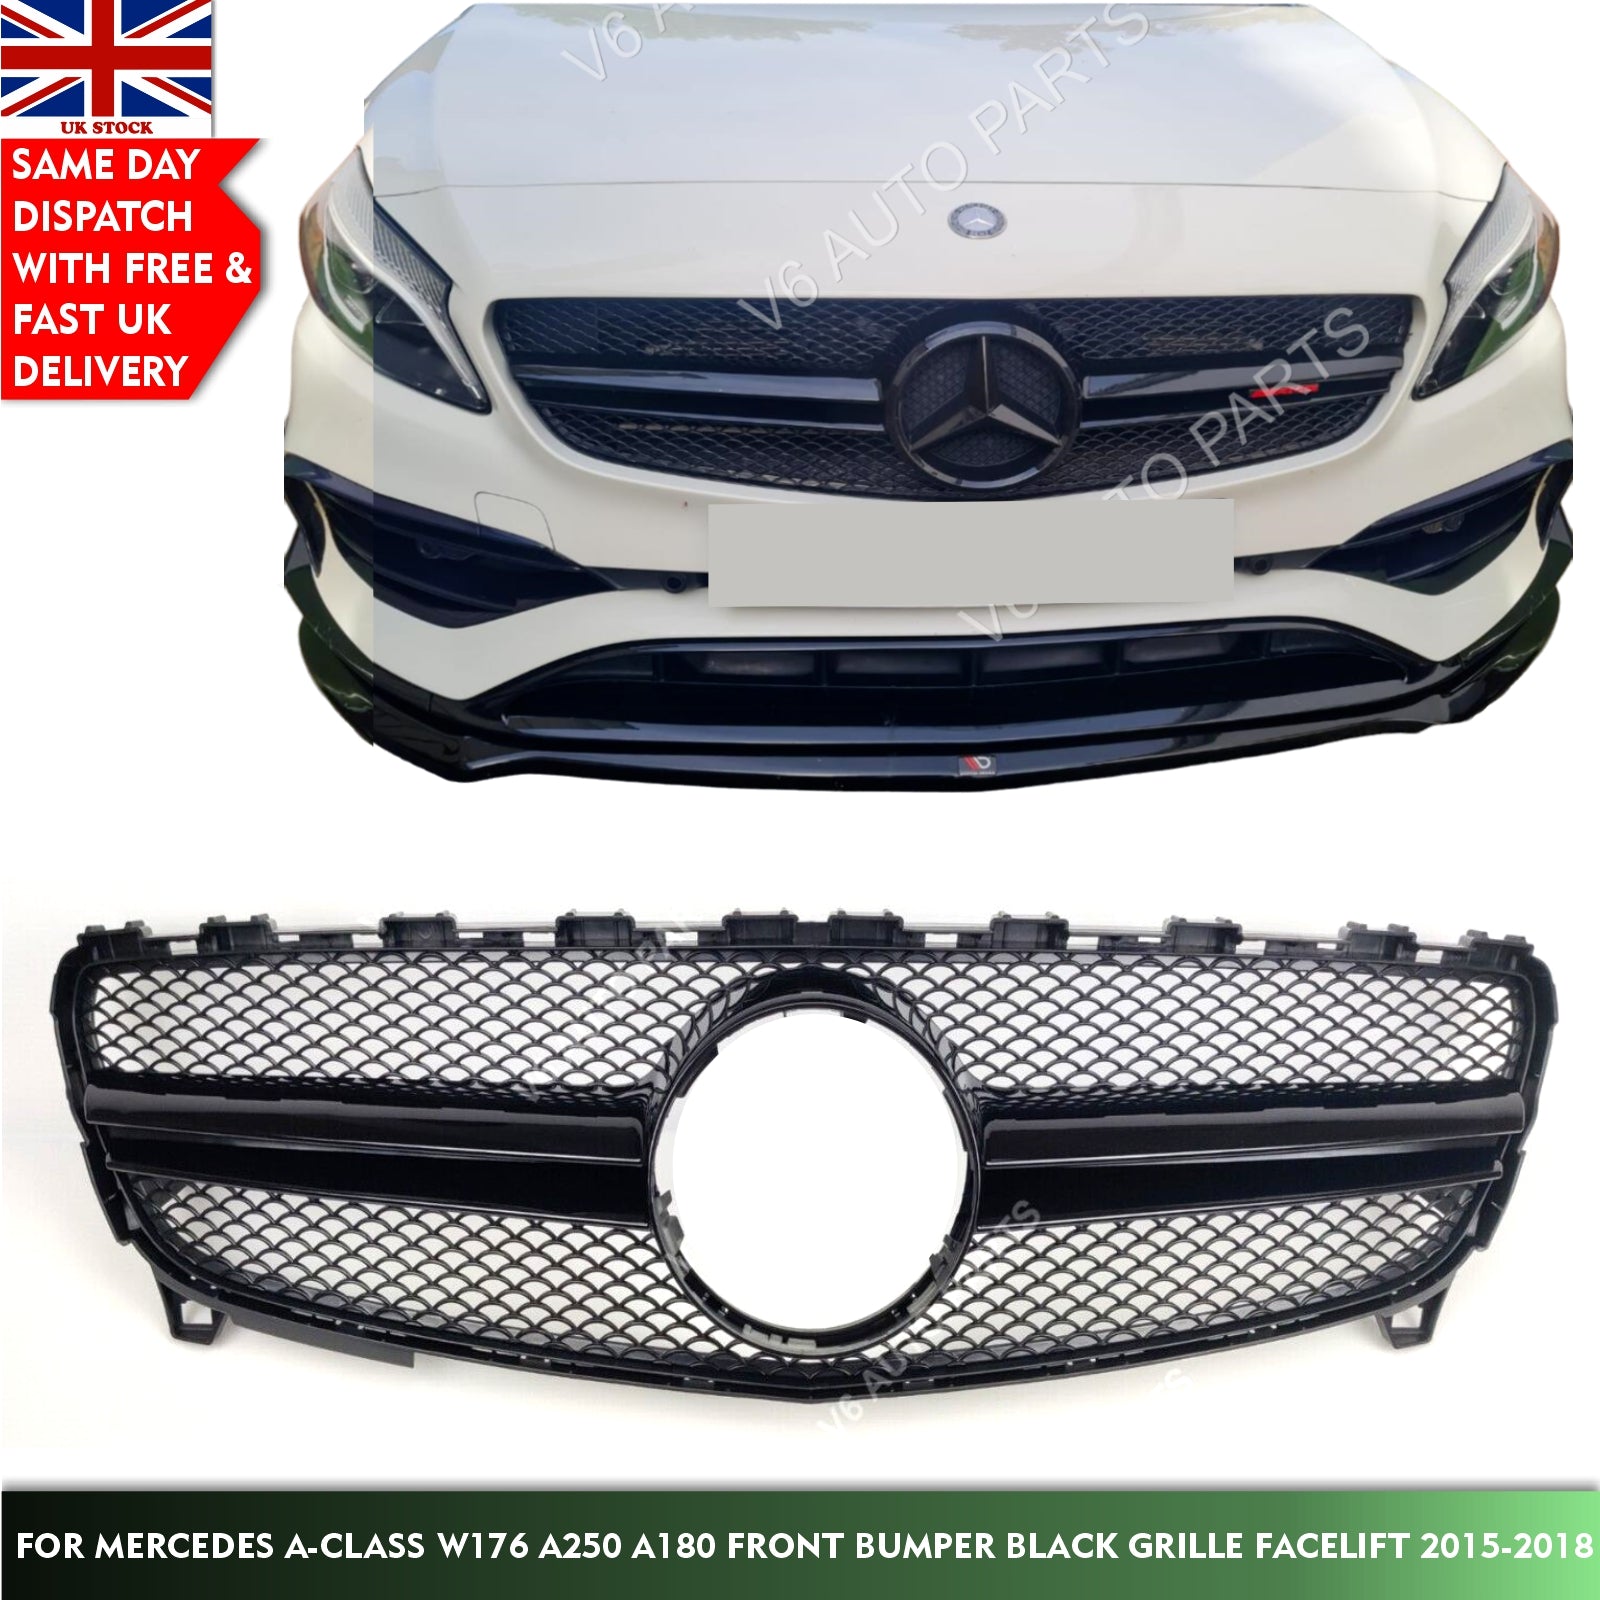 For Mercedes A-Class W176 A160 A220 A320 Front Radiator Black Grille AMG 2015-18